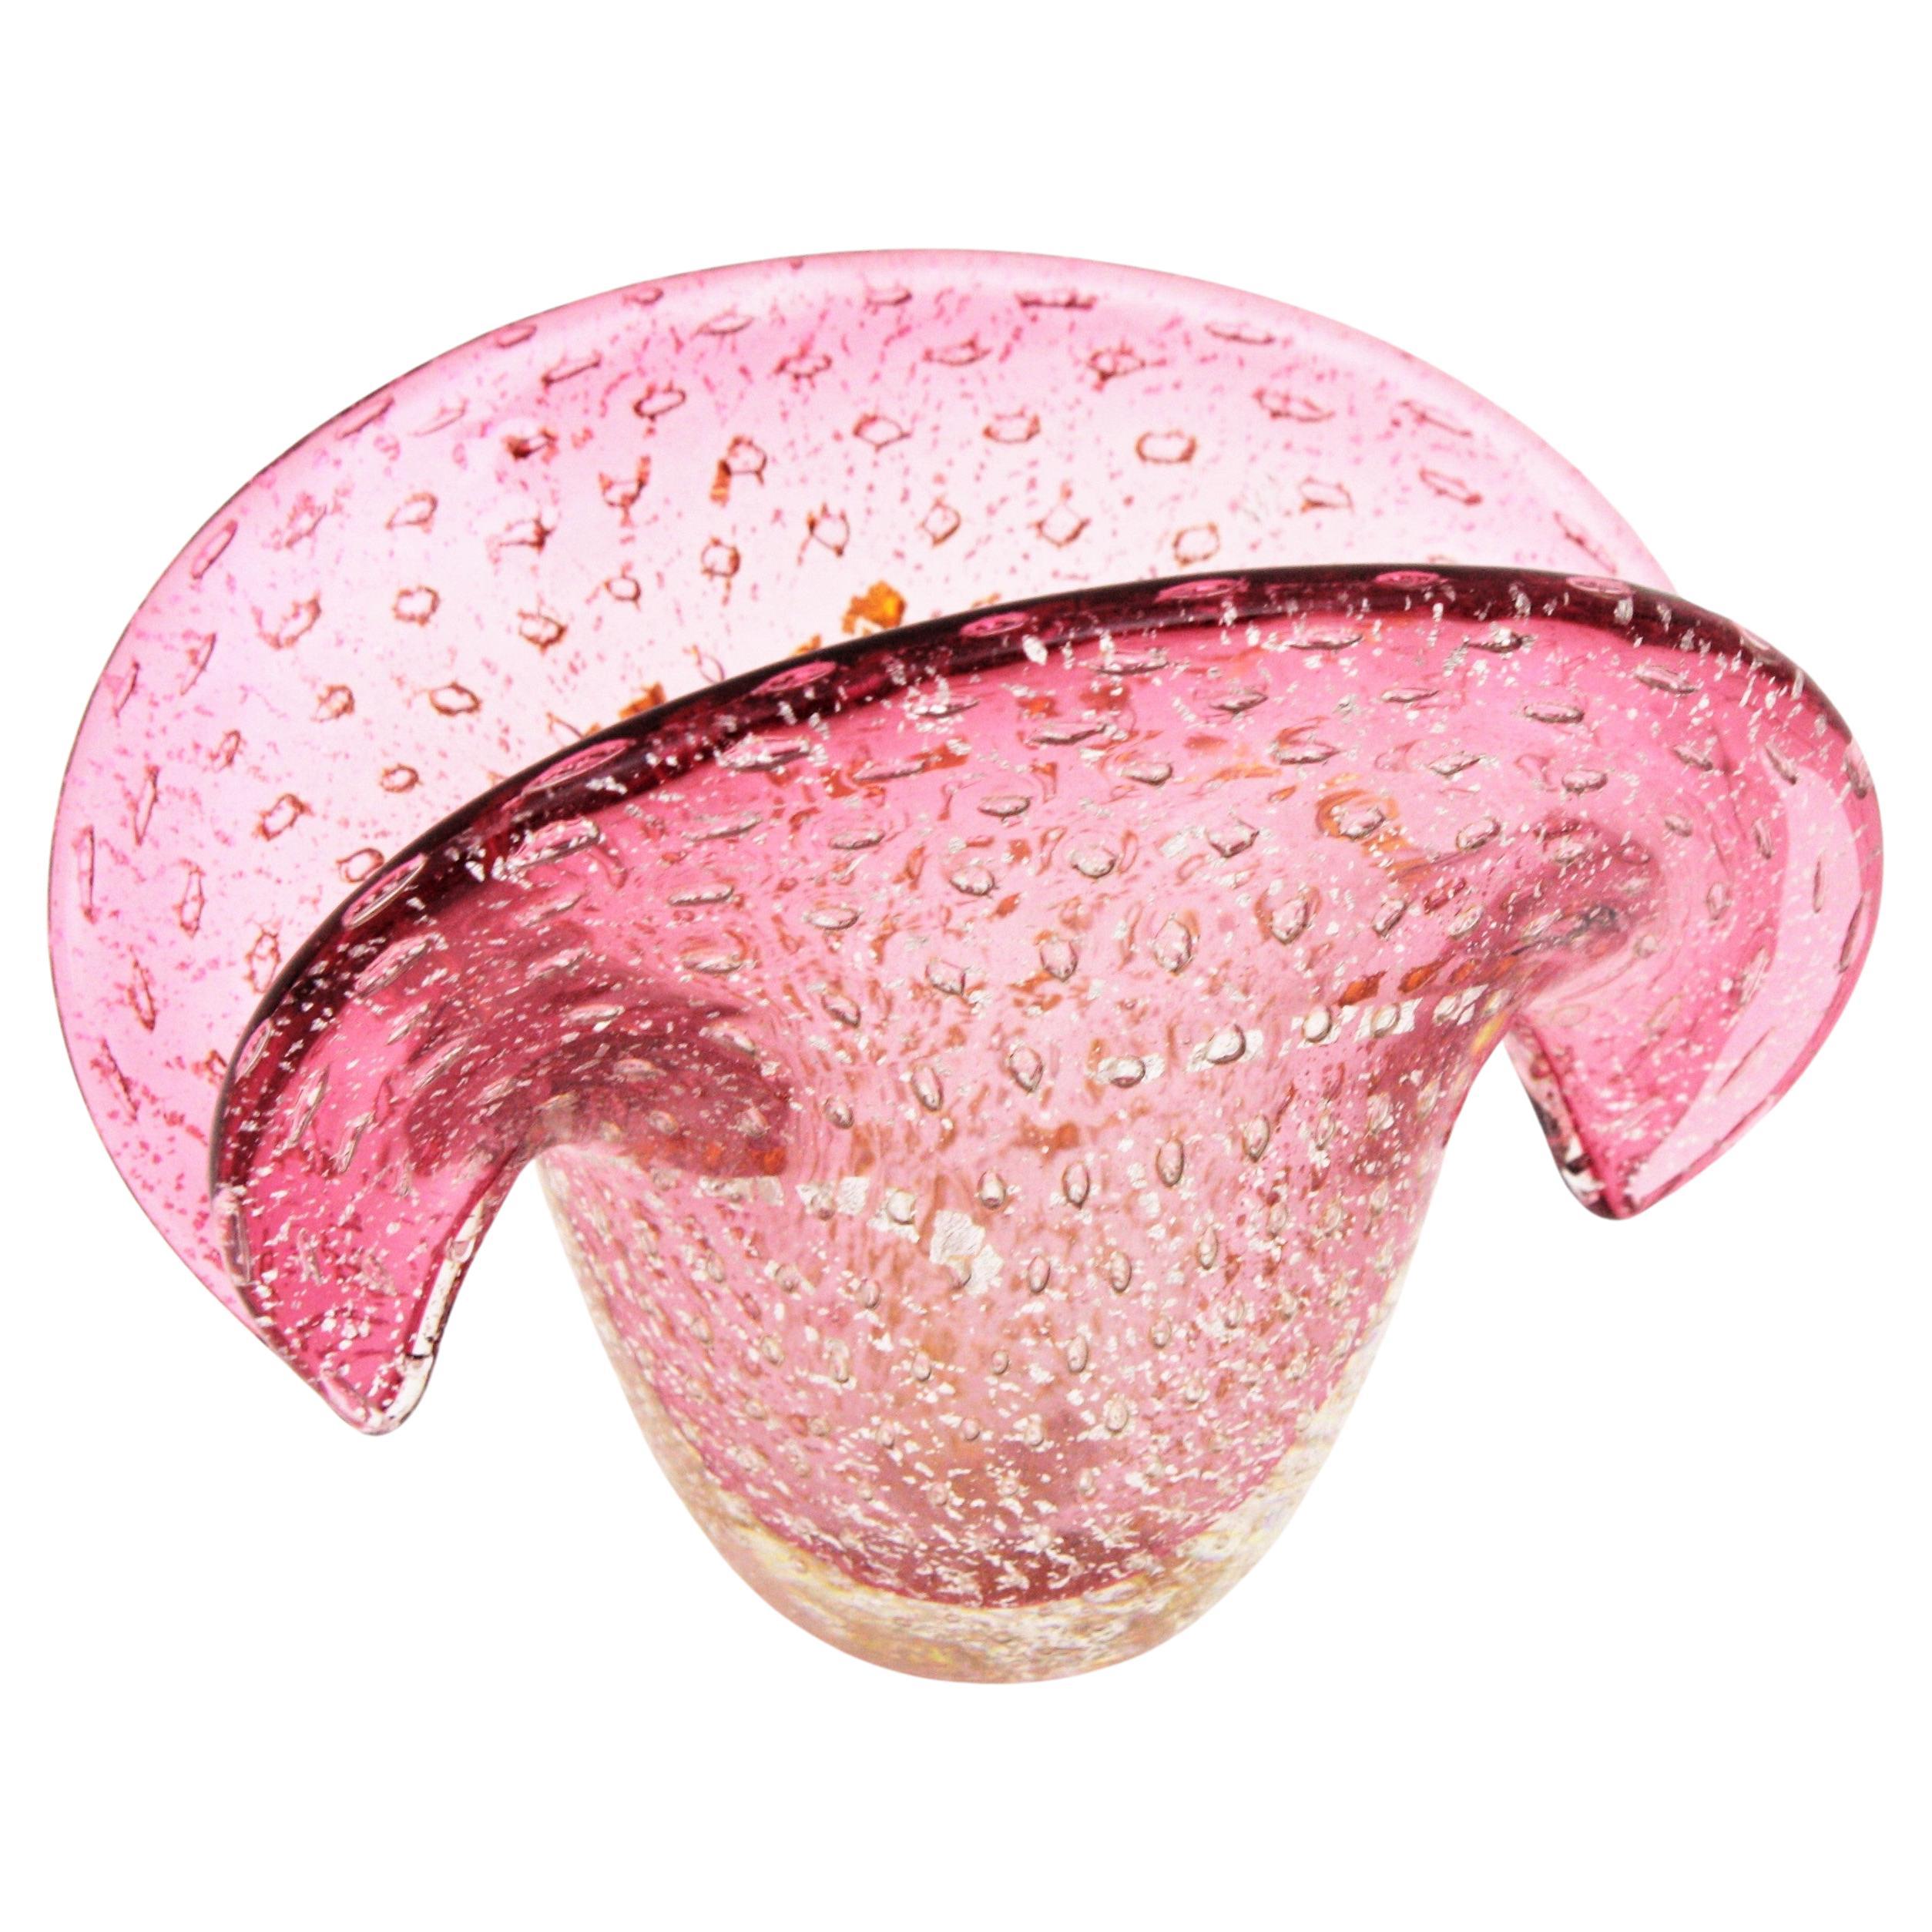 Archimede Seguso Pink Murano Glass Bullicante Clam Shell Bowl with Gold Flecks For Sale